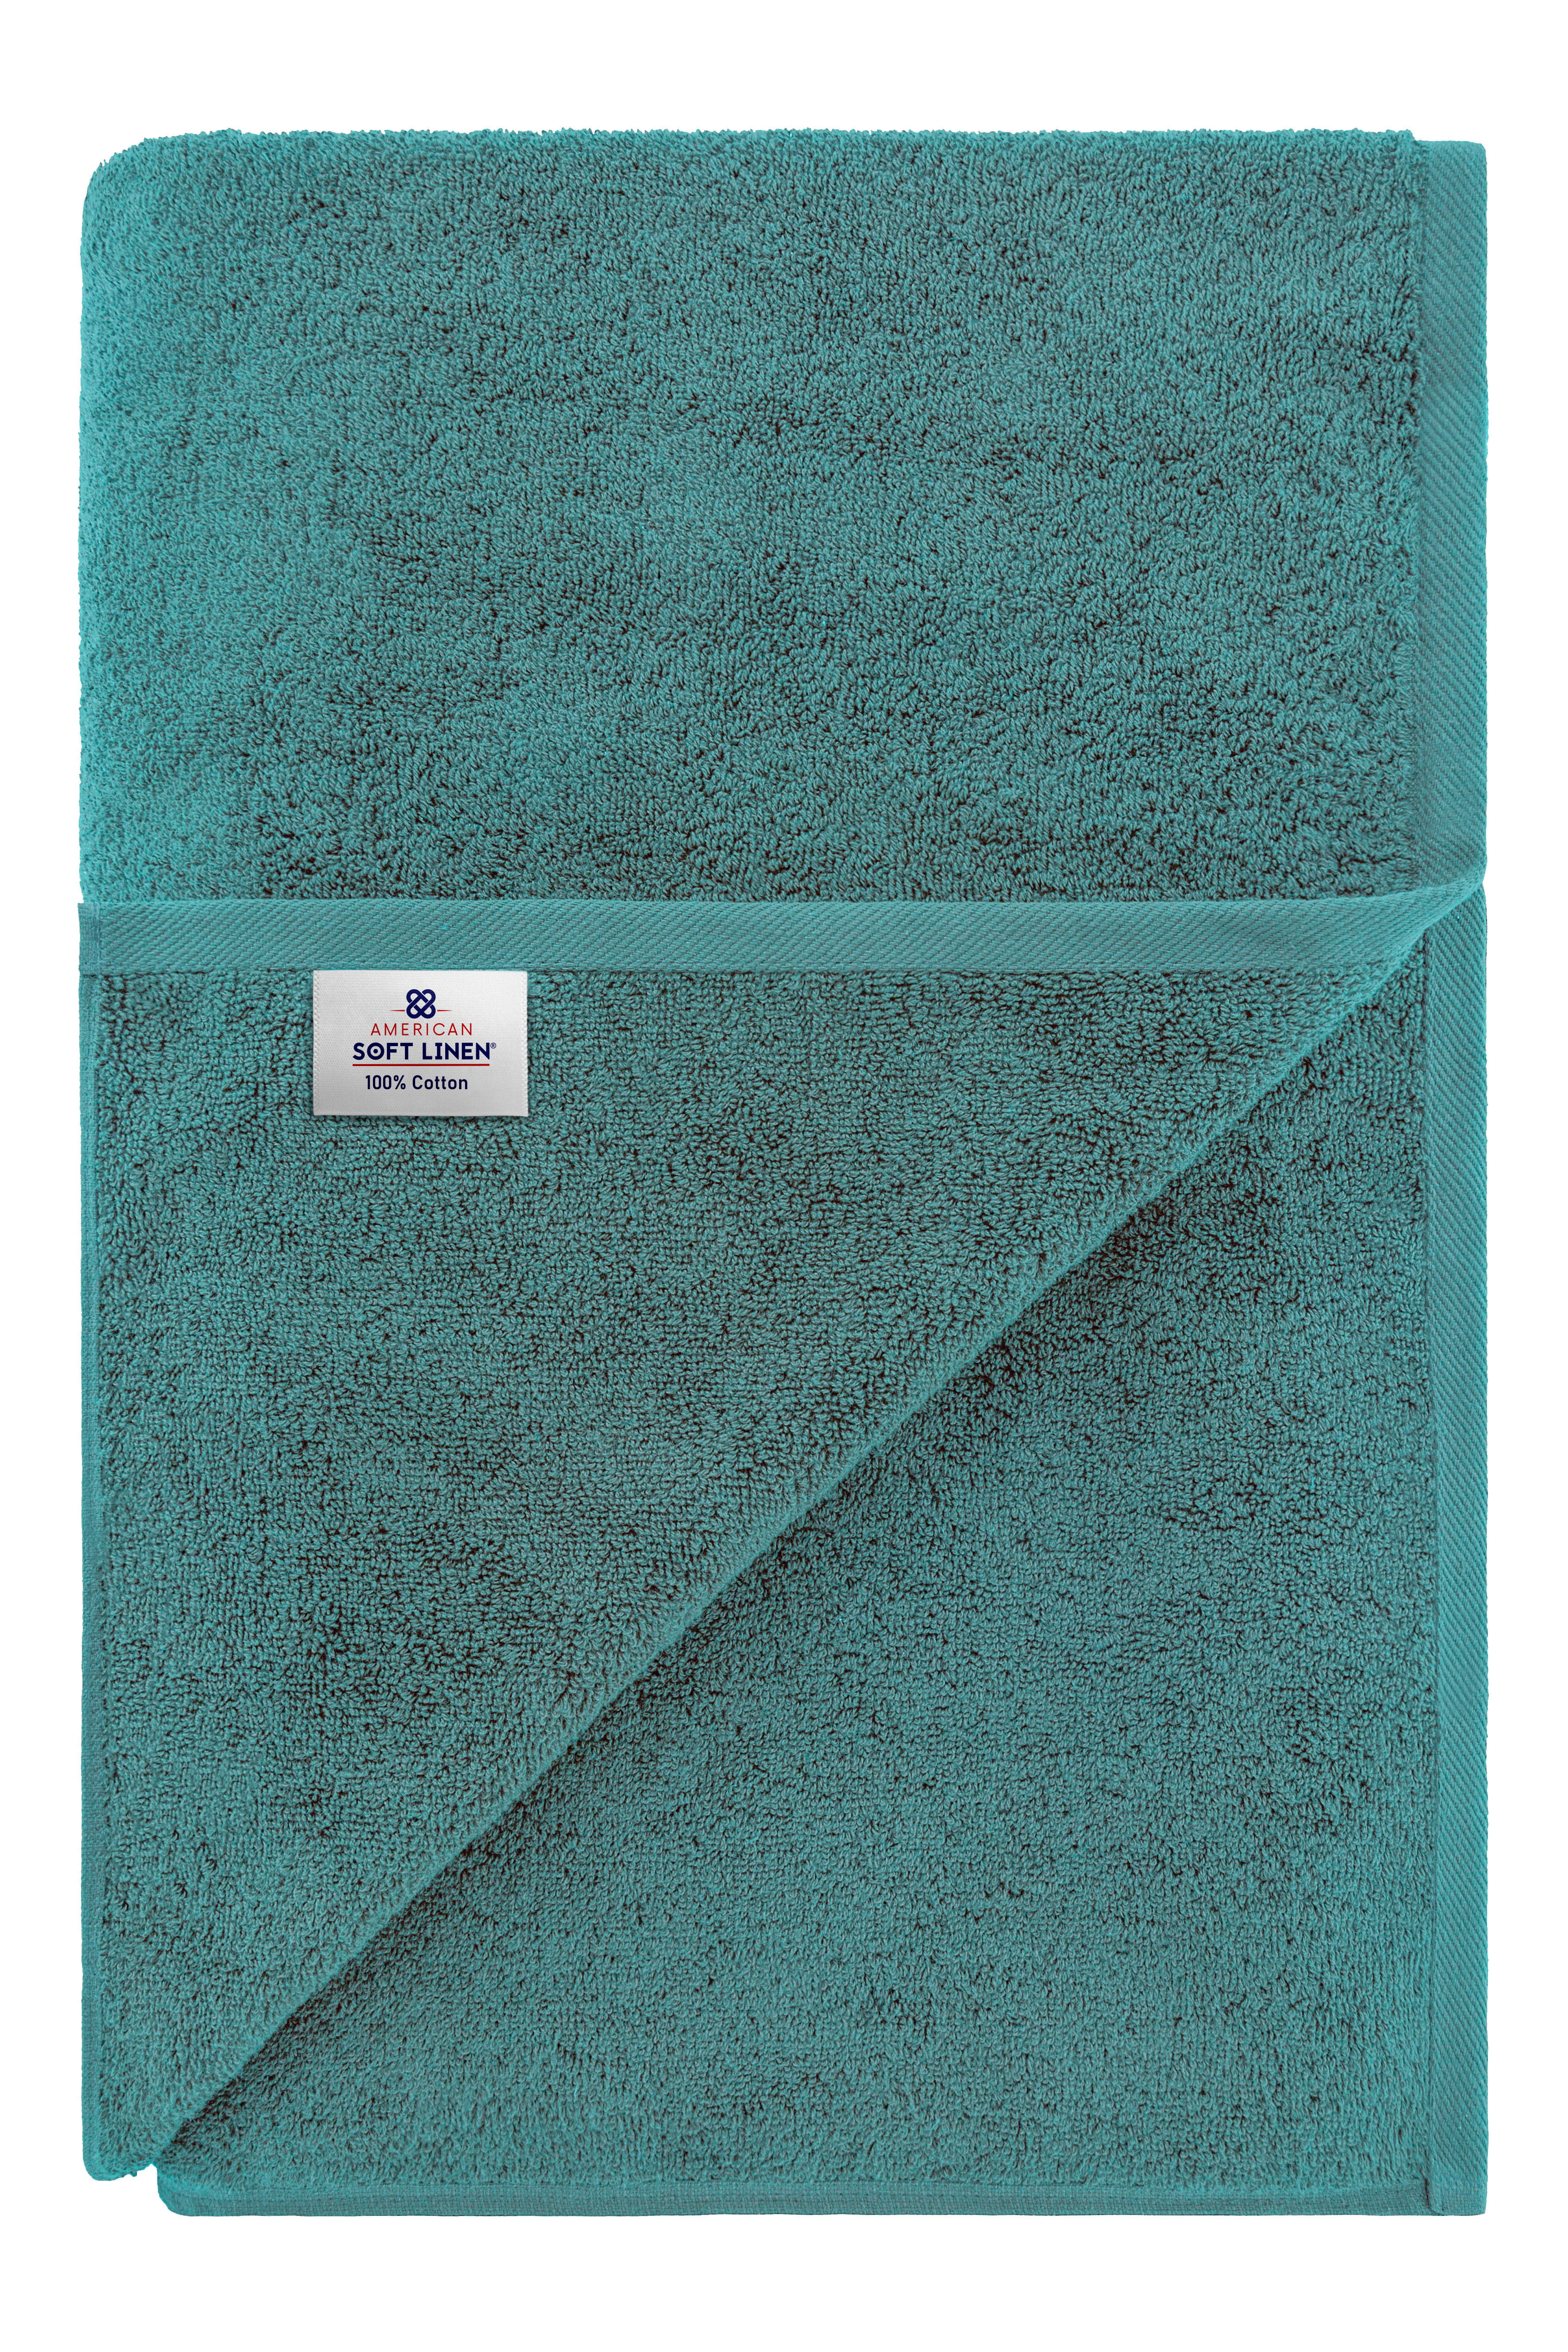 American Soft Linen 100% Cotton Jumbo Large Bath Towel, 35 in by 70 in Bath Towel Sheet, Turquoise Blue